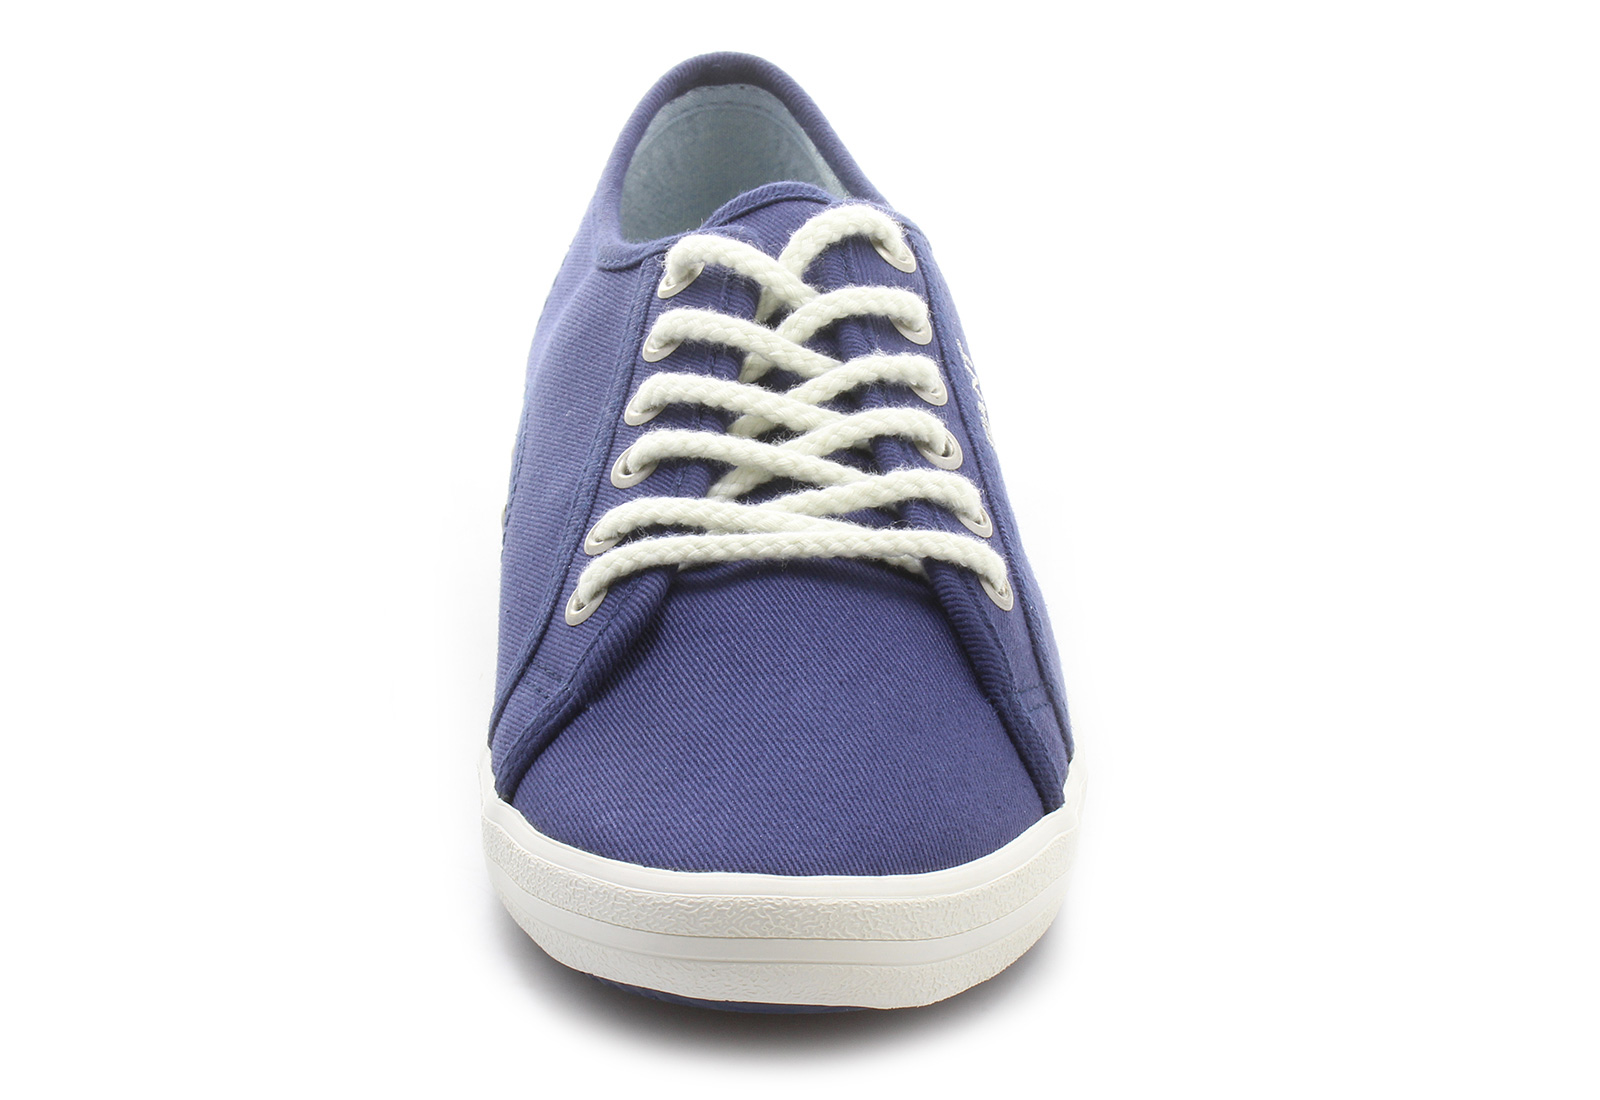 Gant Shoes - New Haven - 10538573-G65 - Online shop for sneakers, shoes